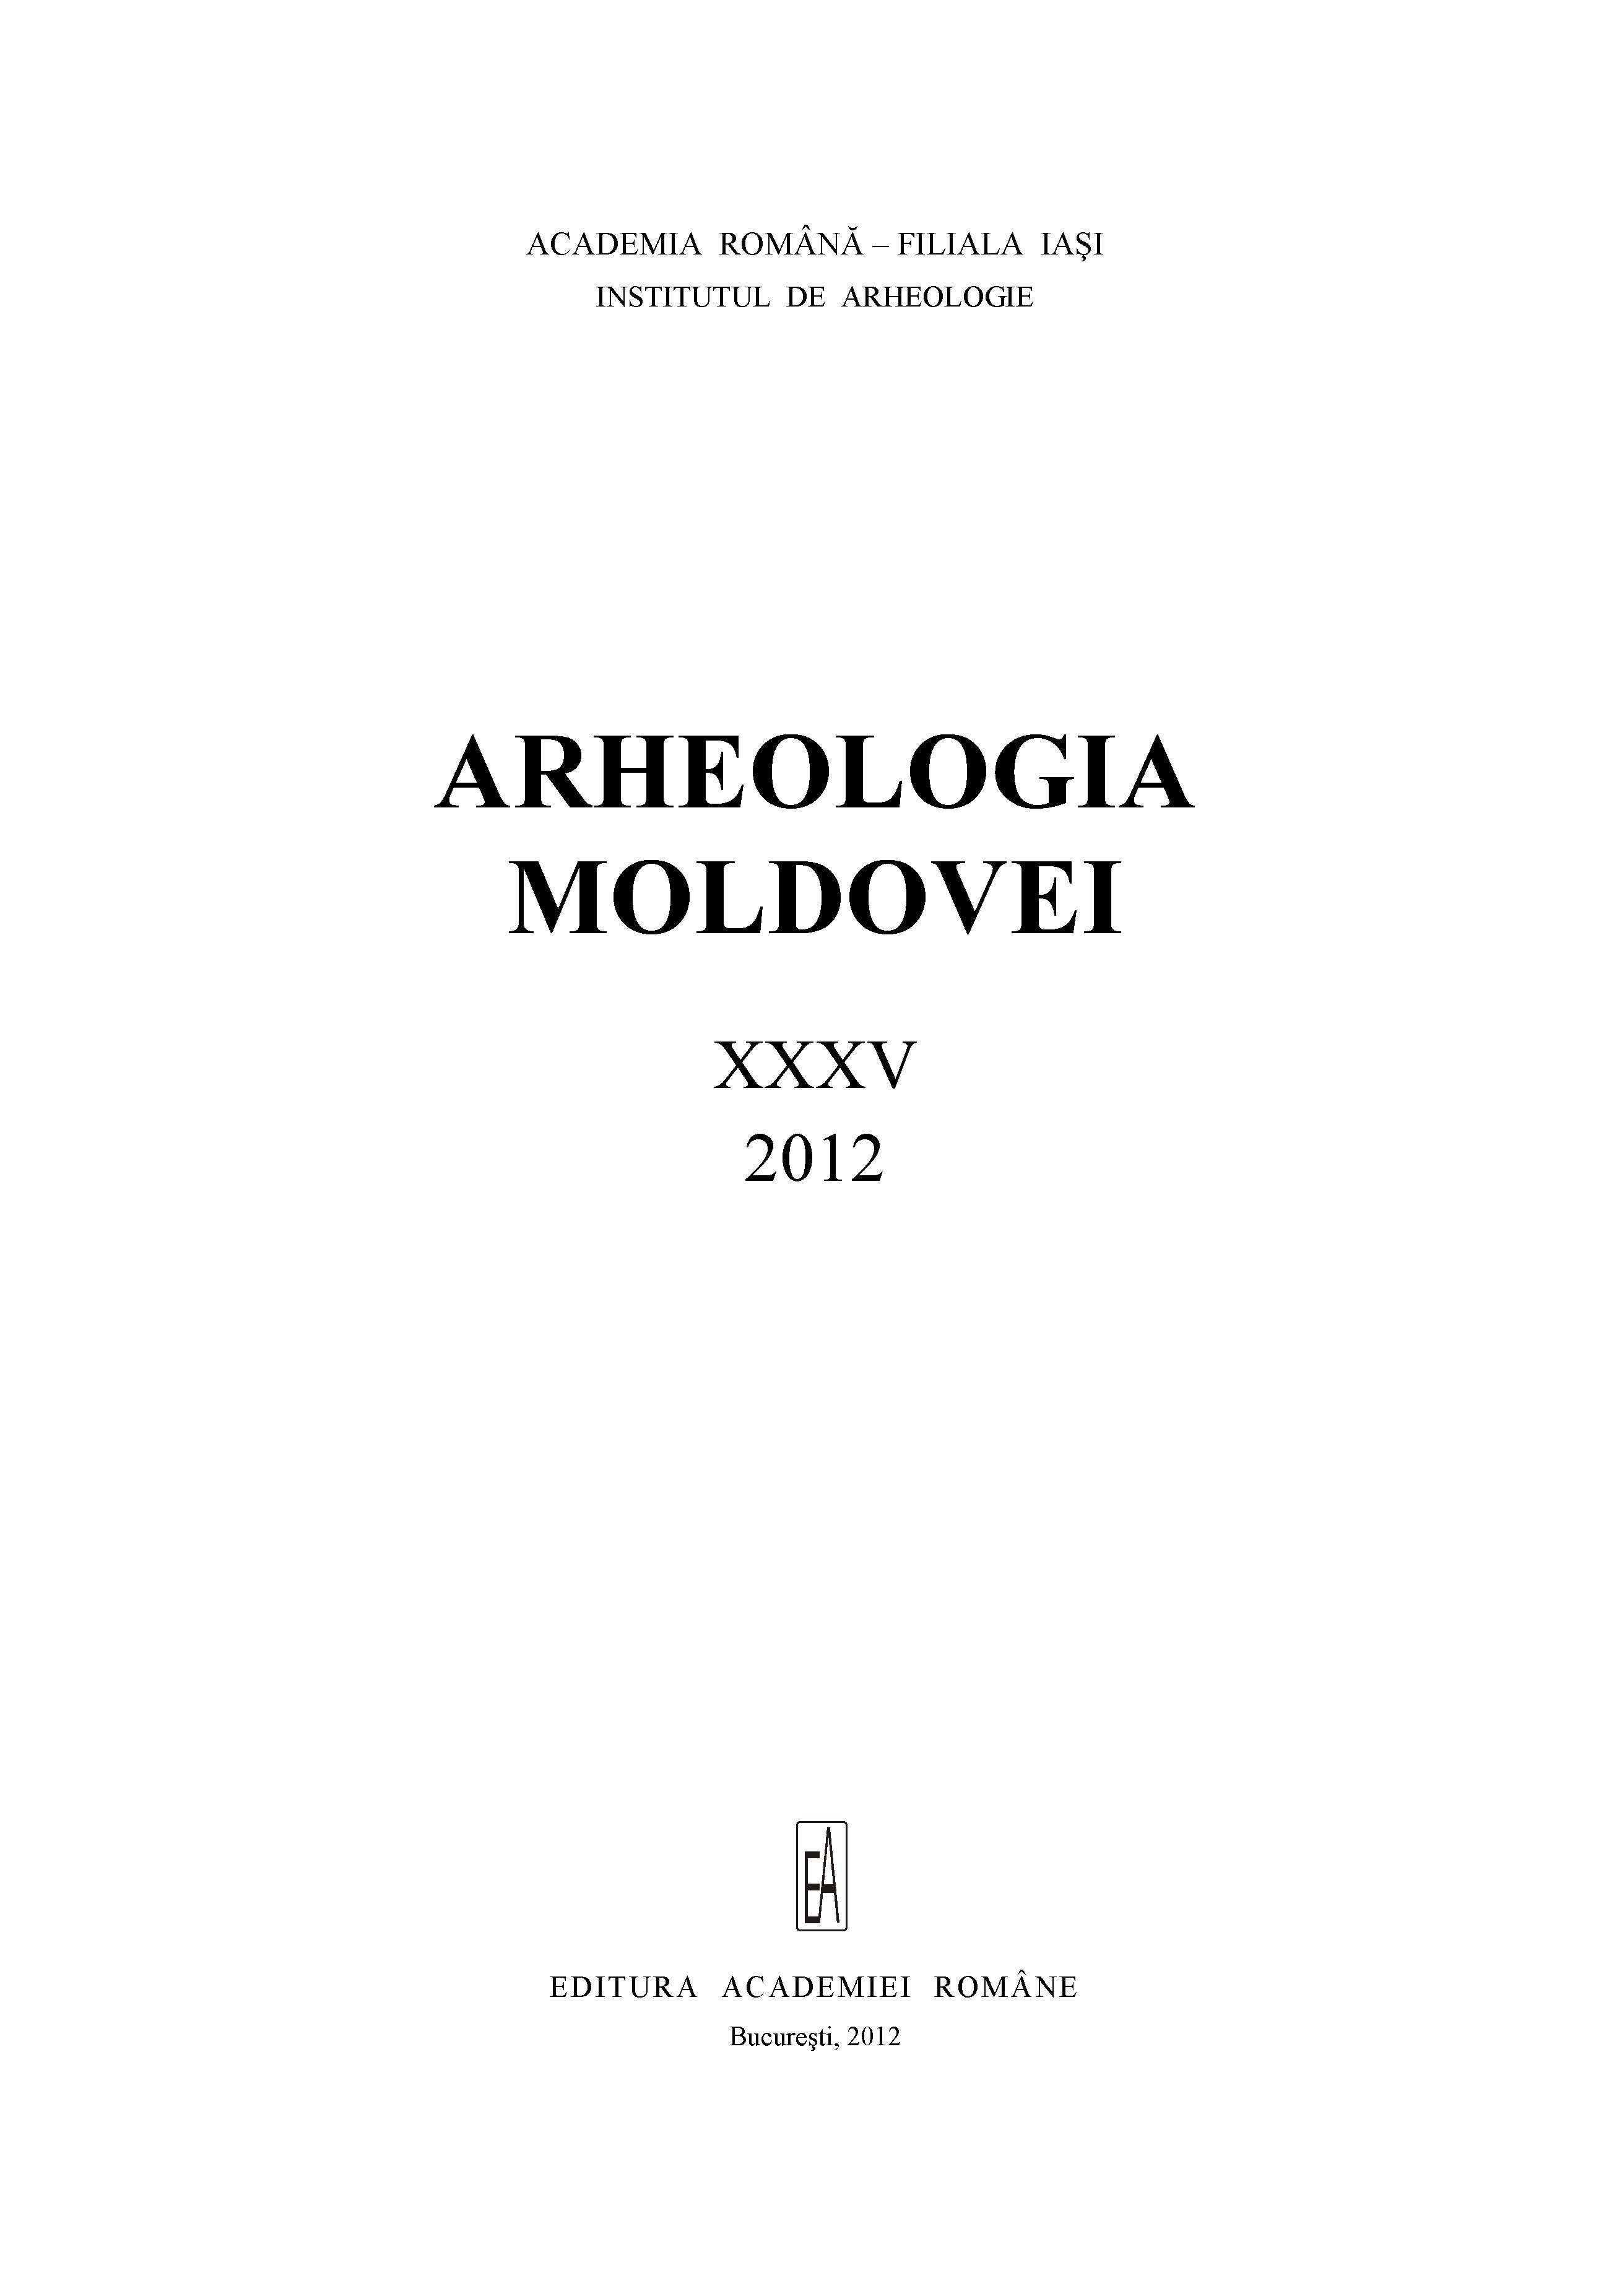 NOT THAT ORIGINAL AFTER ALL: THE CHRONO-CULTURAL FRAMEWORK OF THE UPPER PALEOLITHIC ON THE BISTRIȚA VALLEY (NORTHEASTERN ROMANIA)